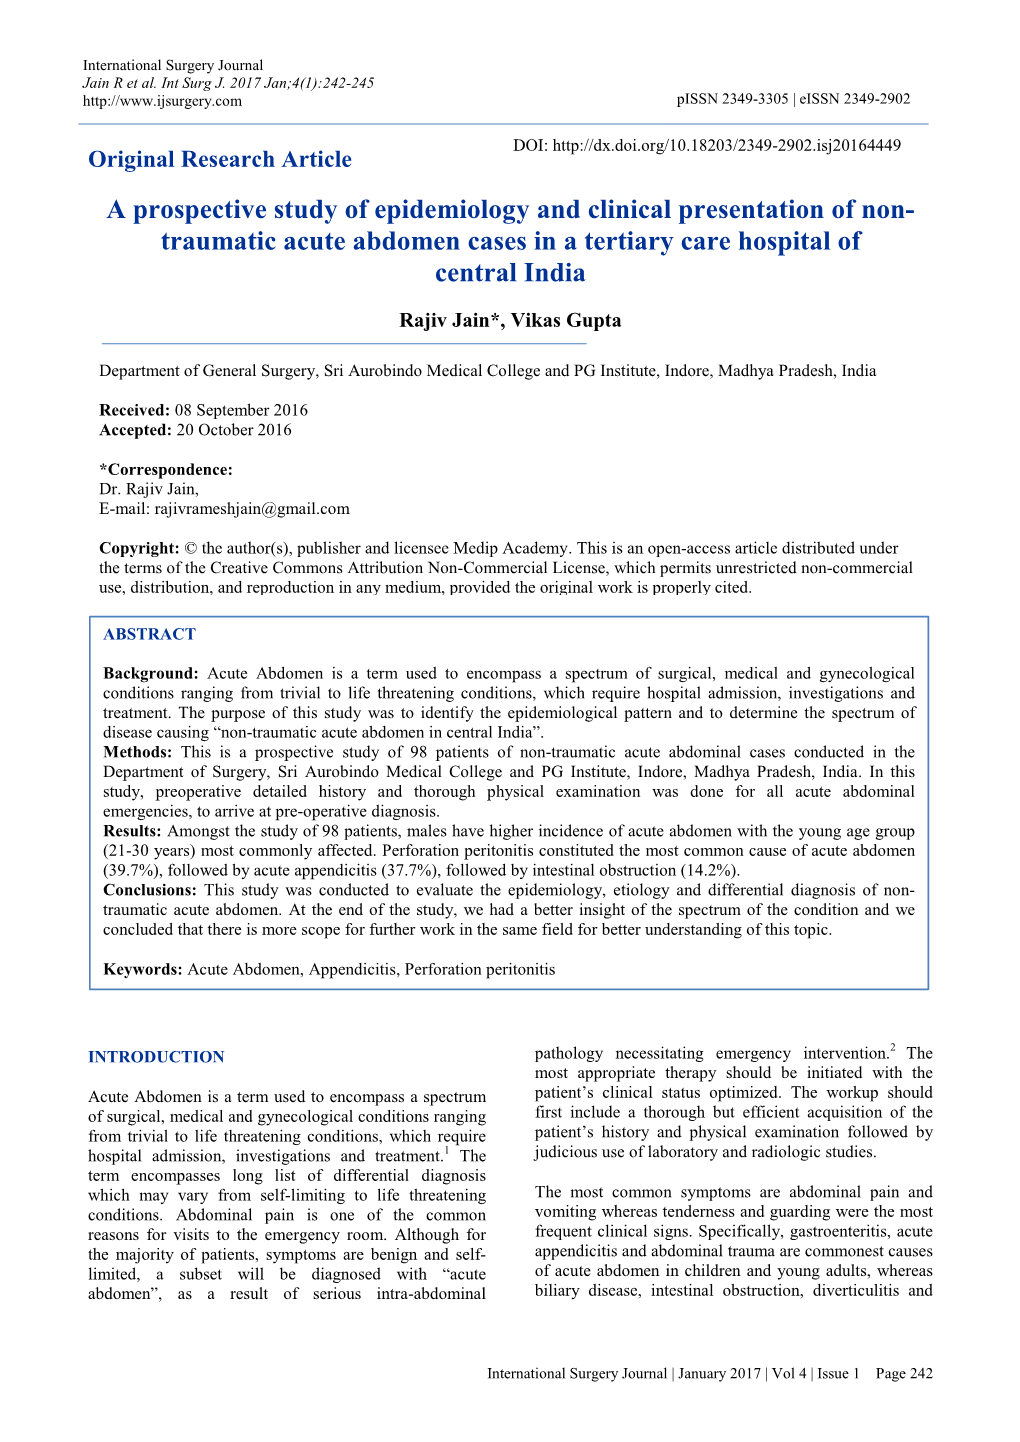 Traumatic Acute Abdomen Cases in a Tertiary Care Hospital of Central India